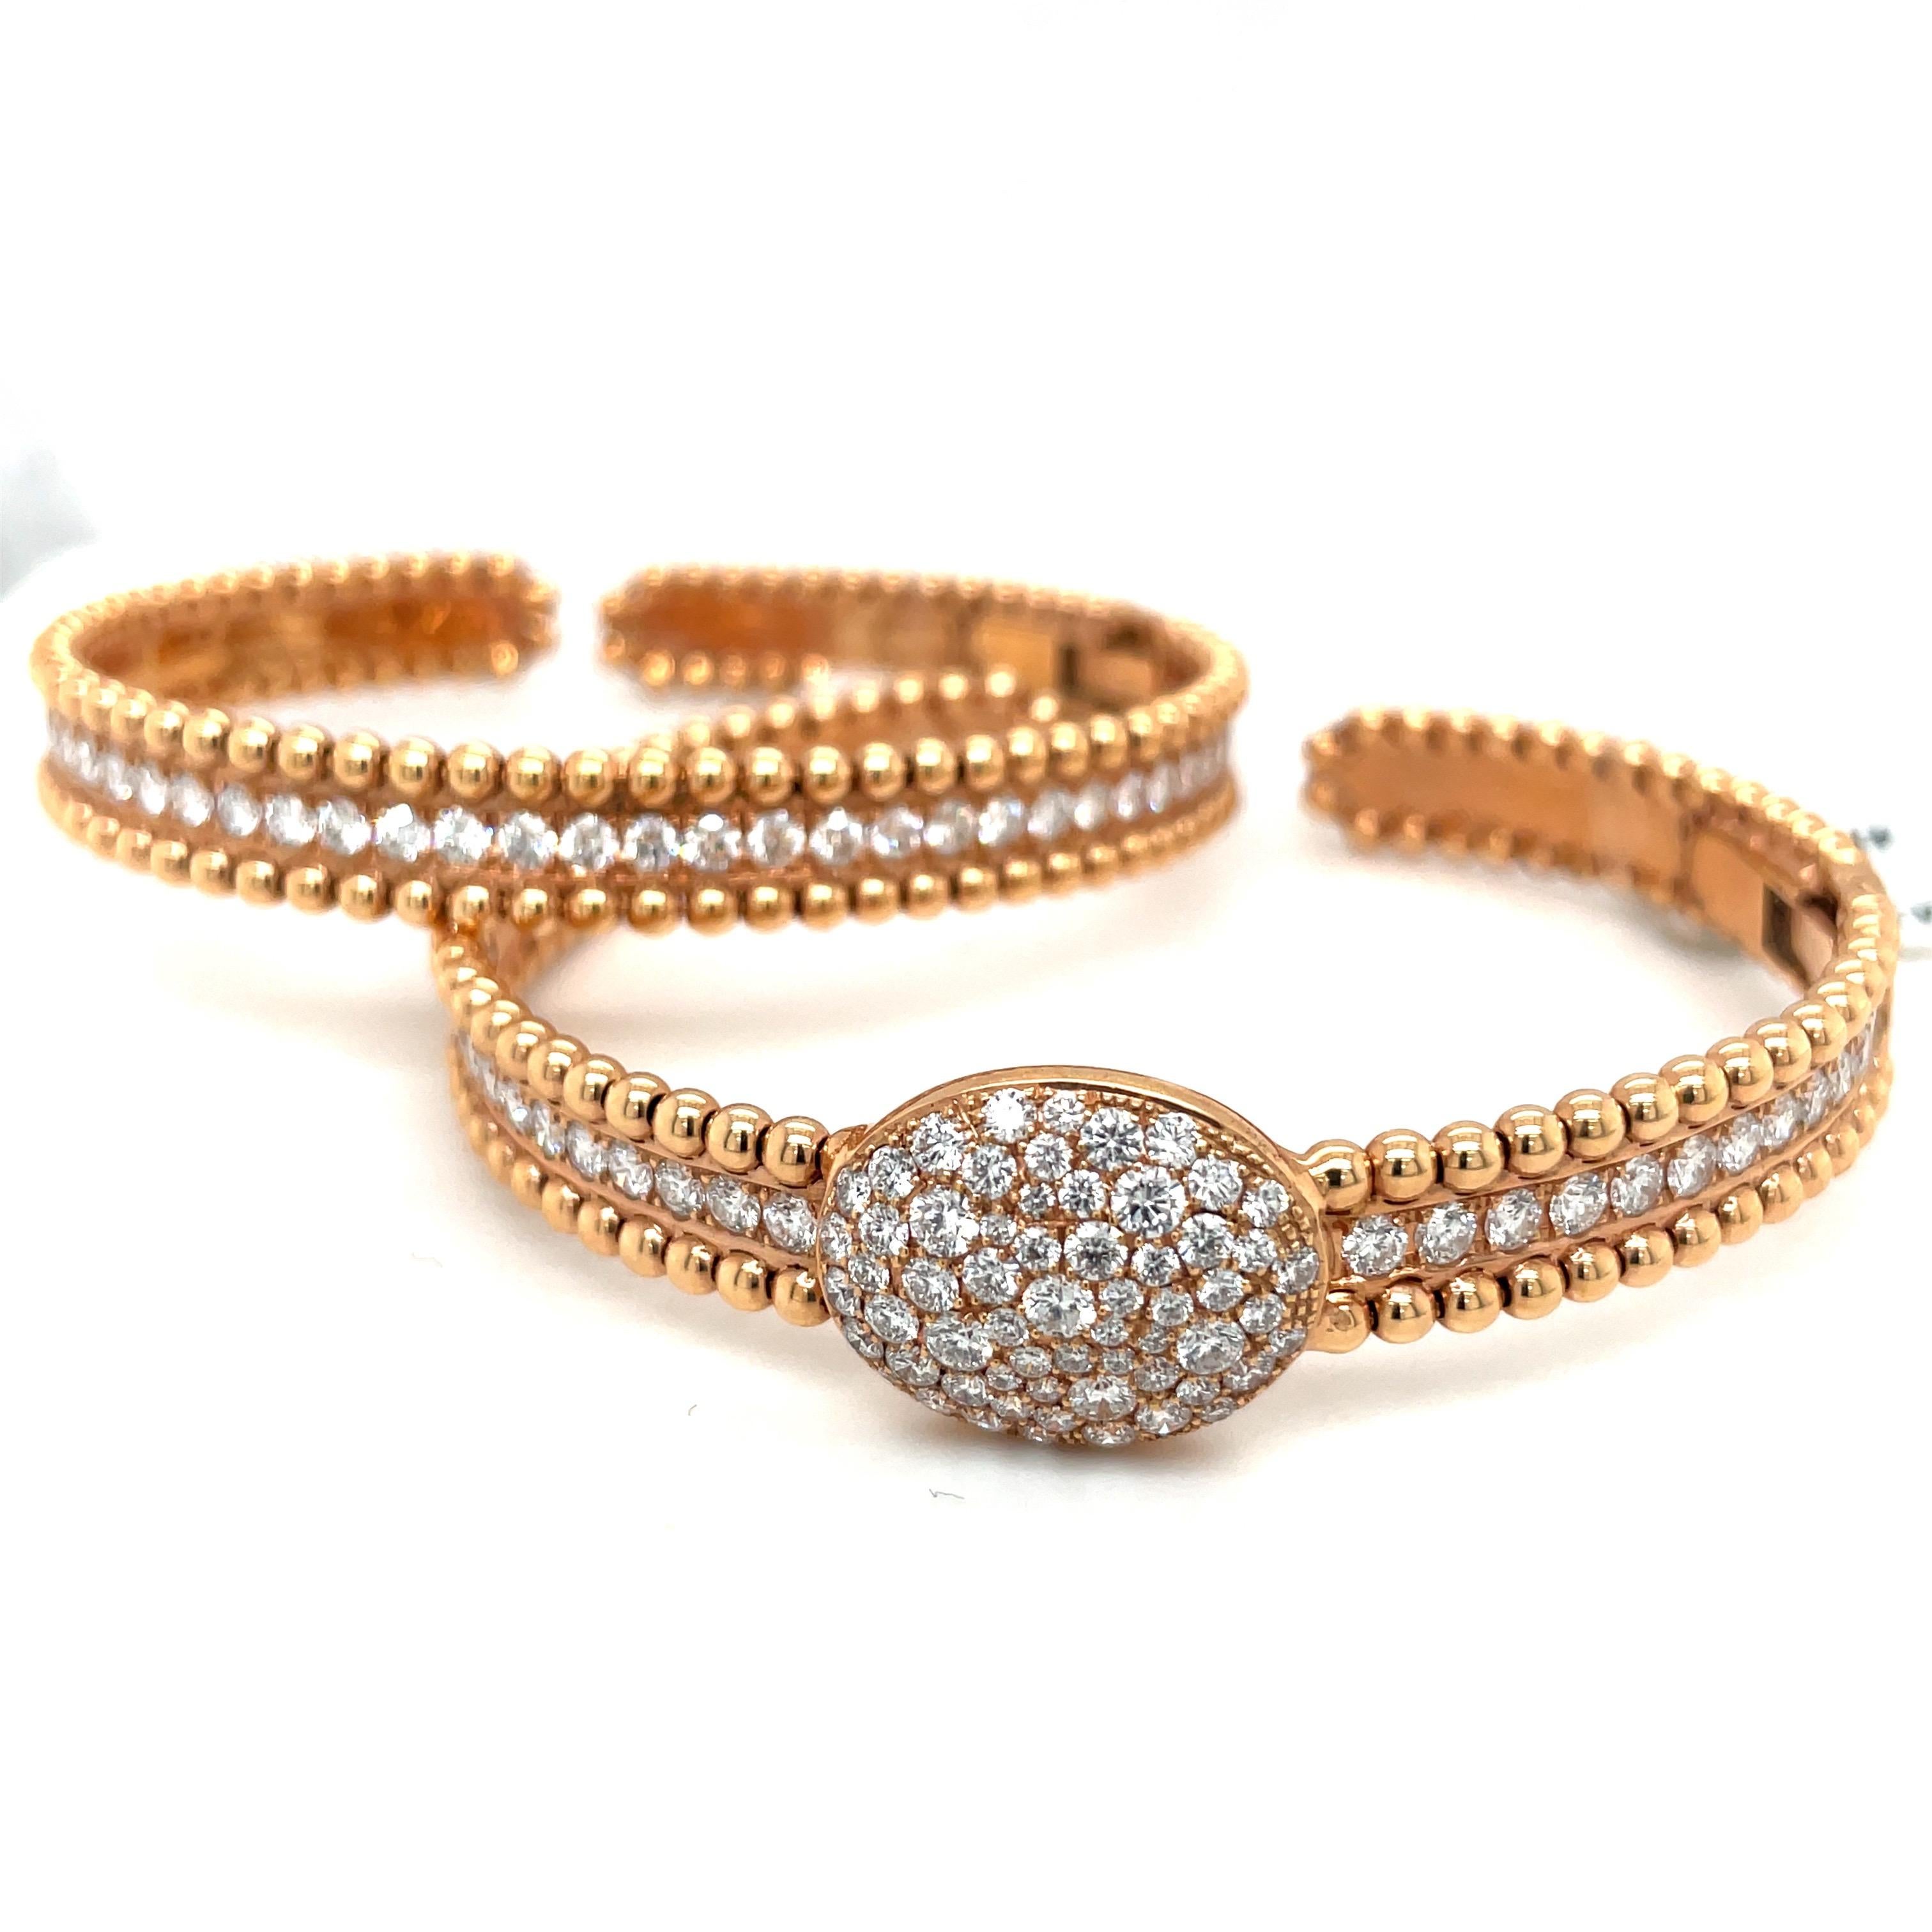 Contemporary 18KT Rose Gold 3.03 Ct Diamond Beaded Bracelet with Oval Diamond Center For Sale